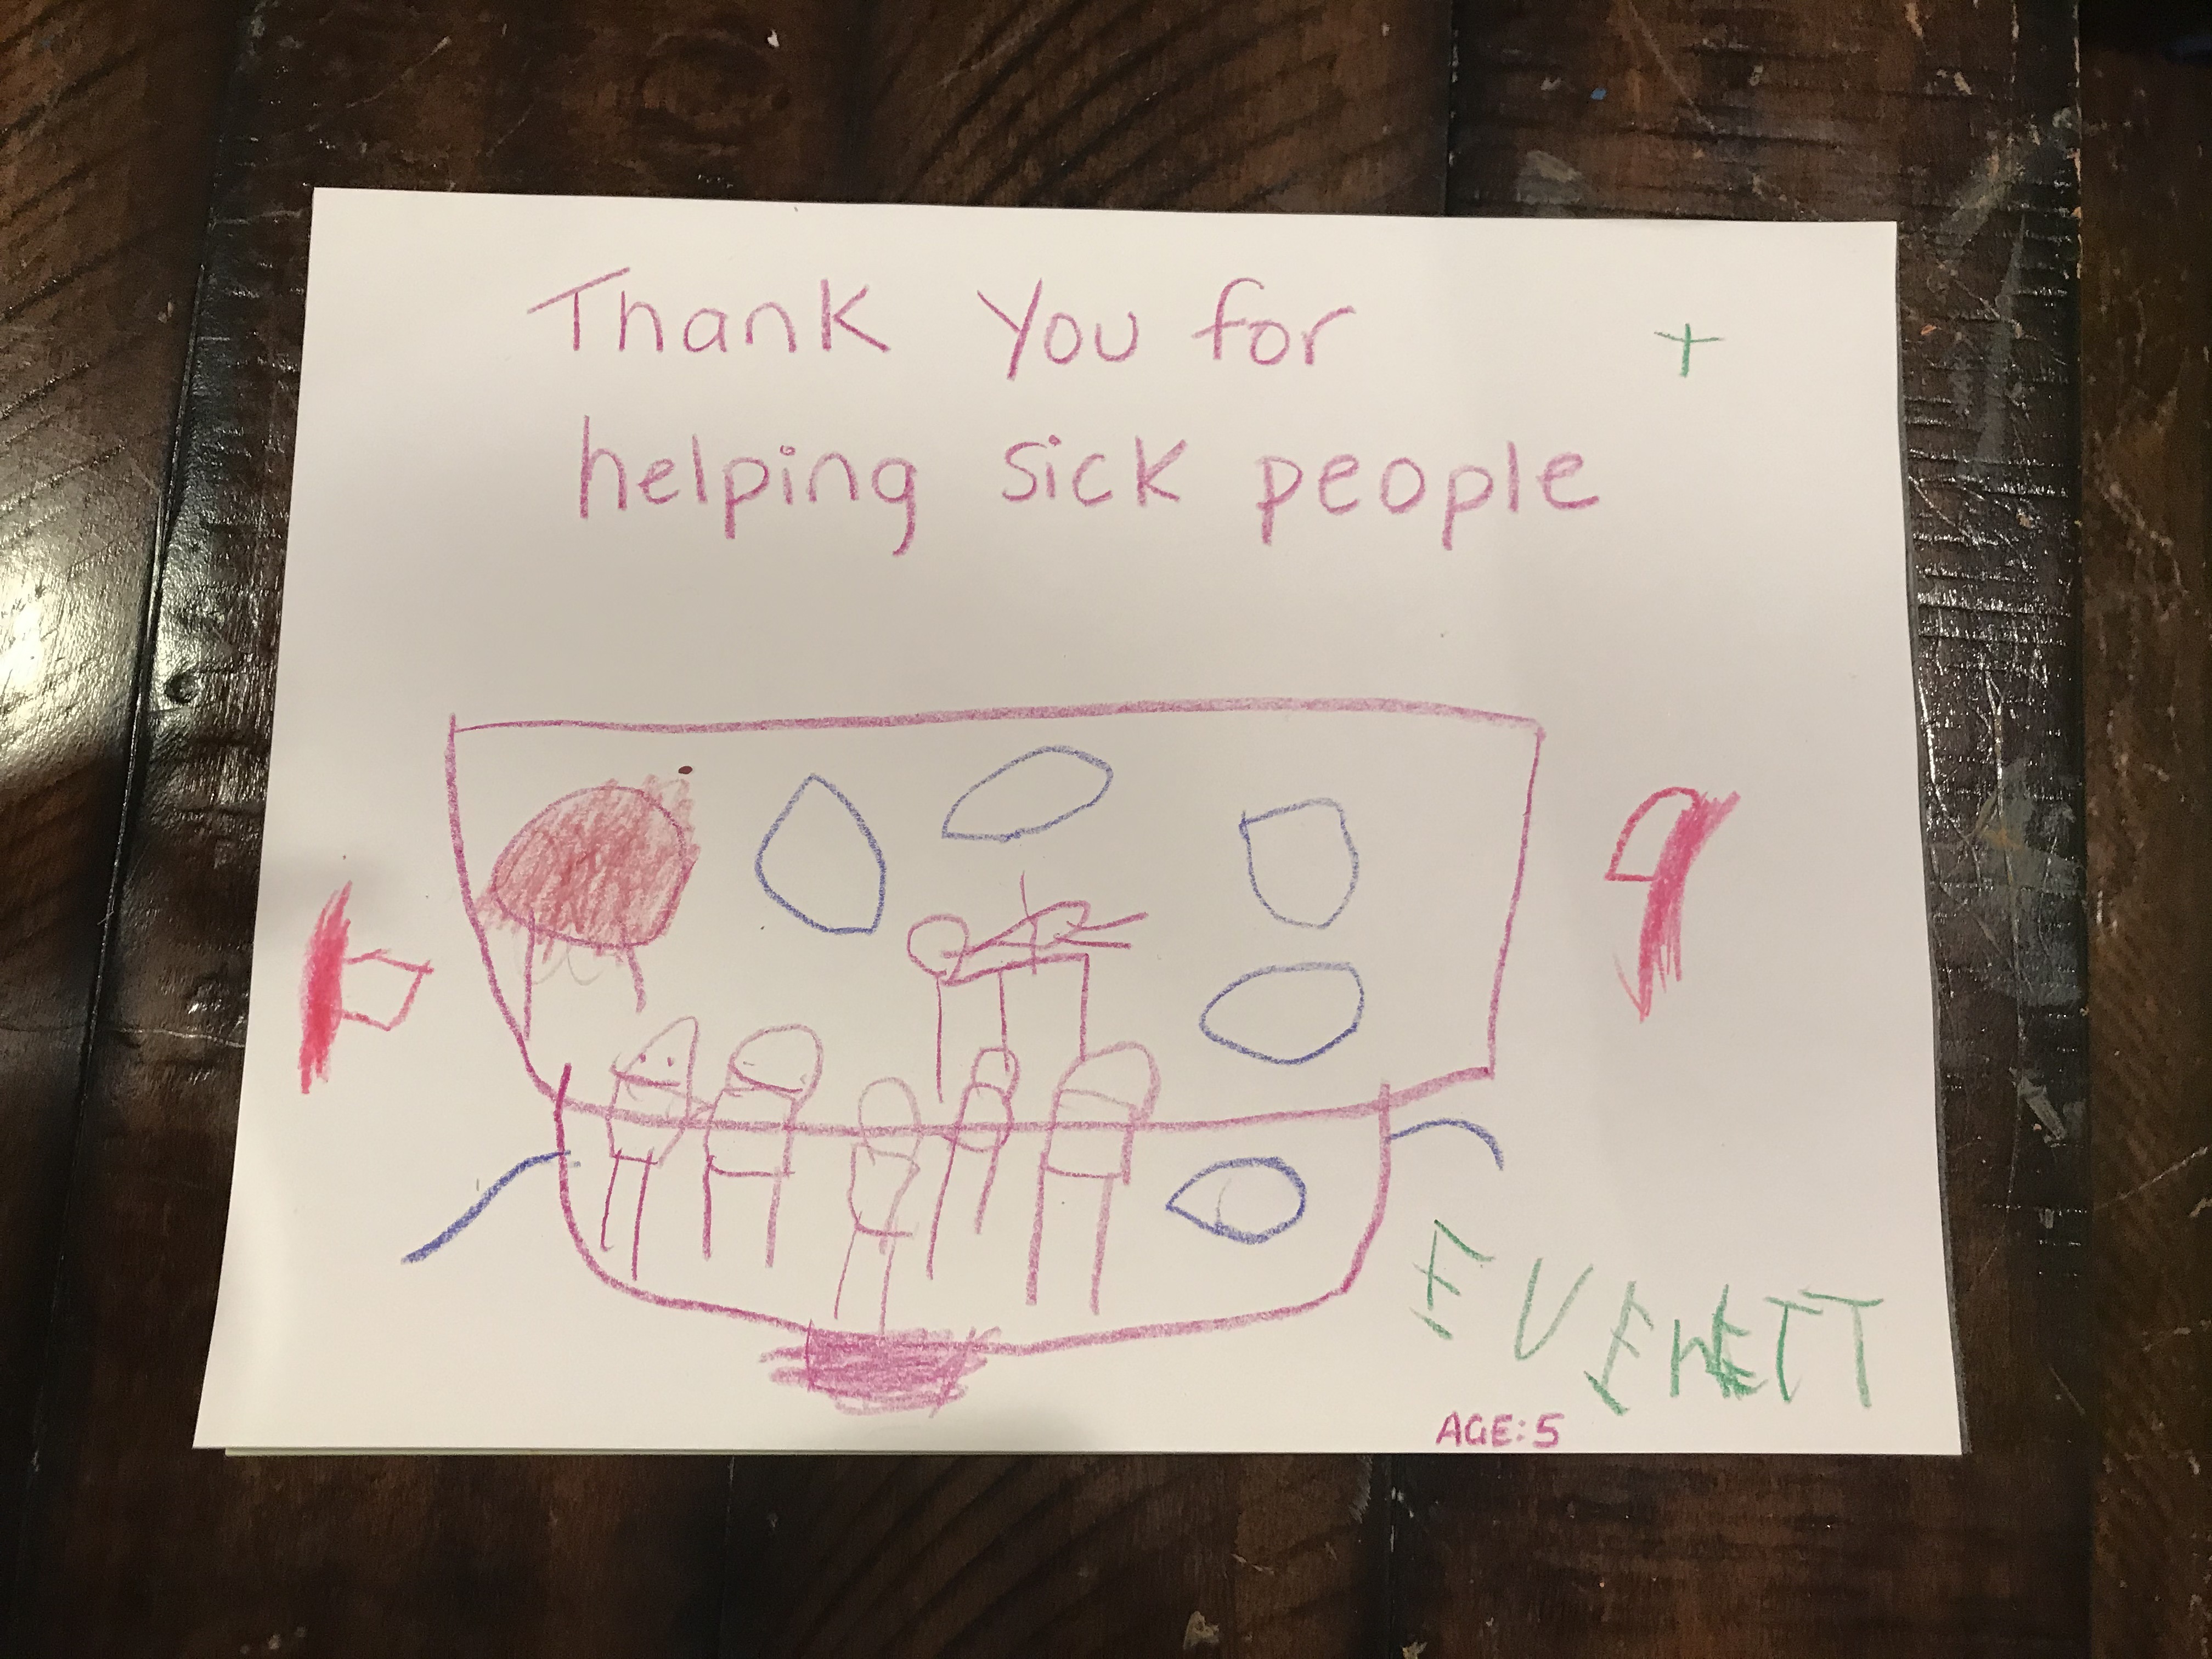 Thank you for helping sick people